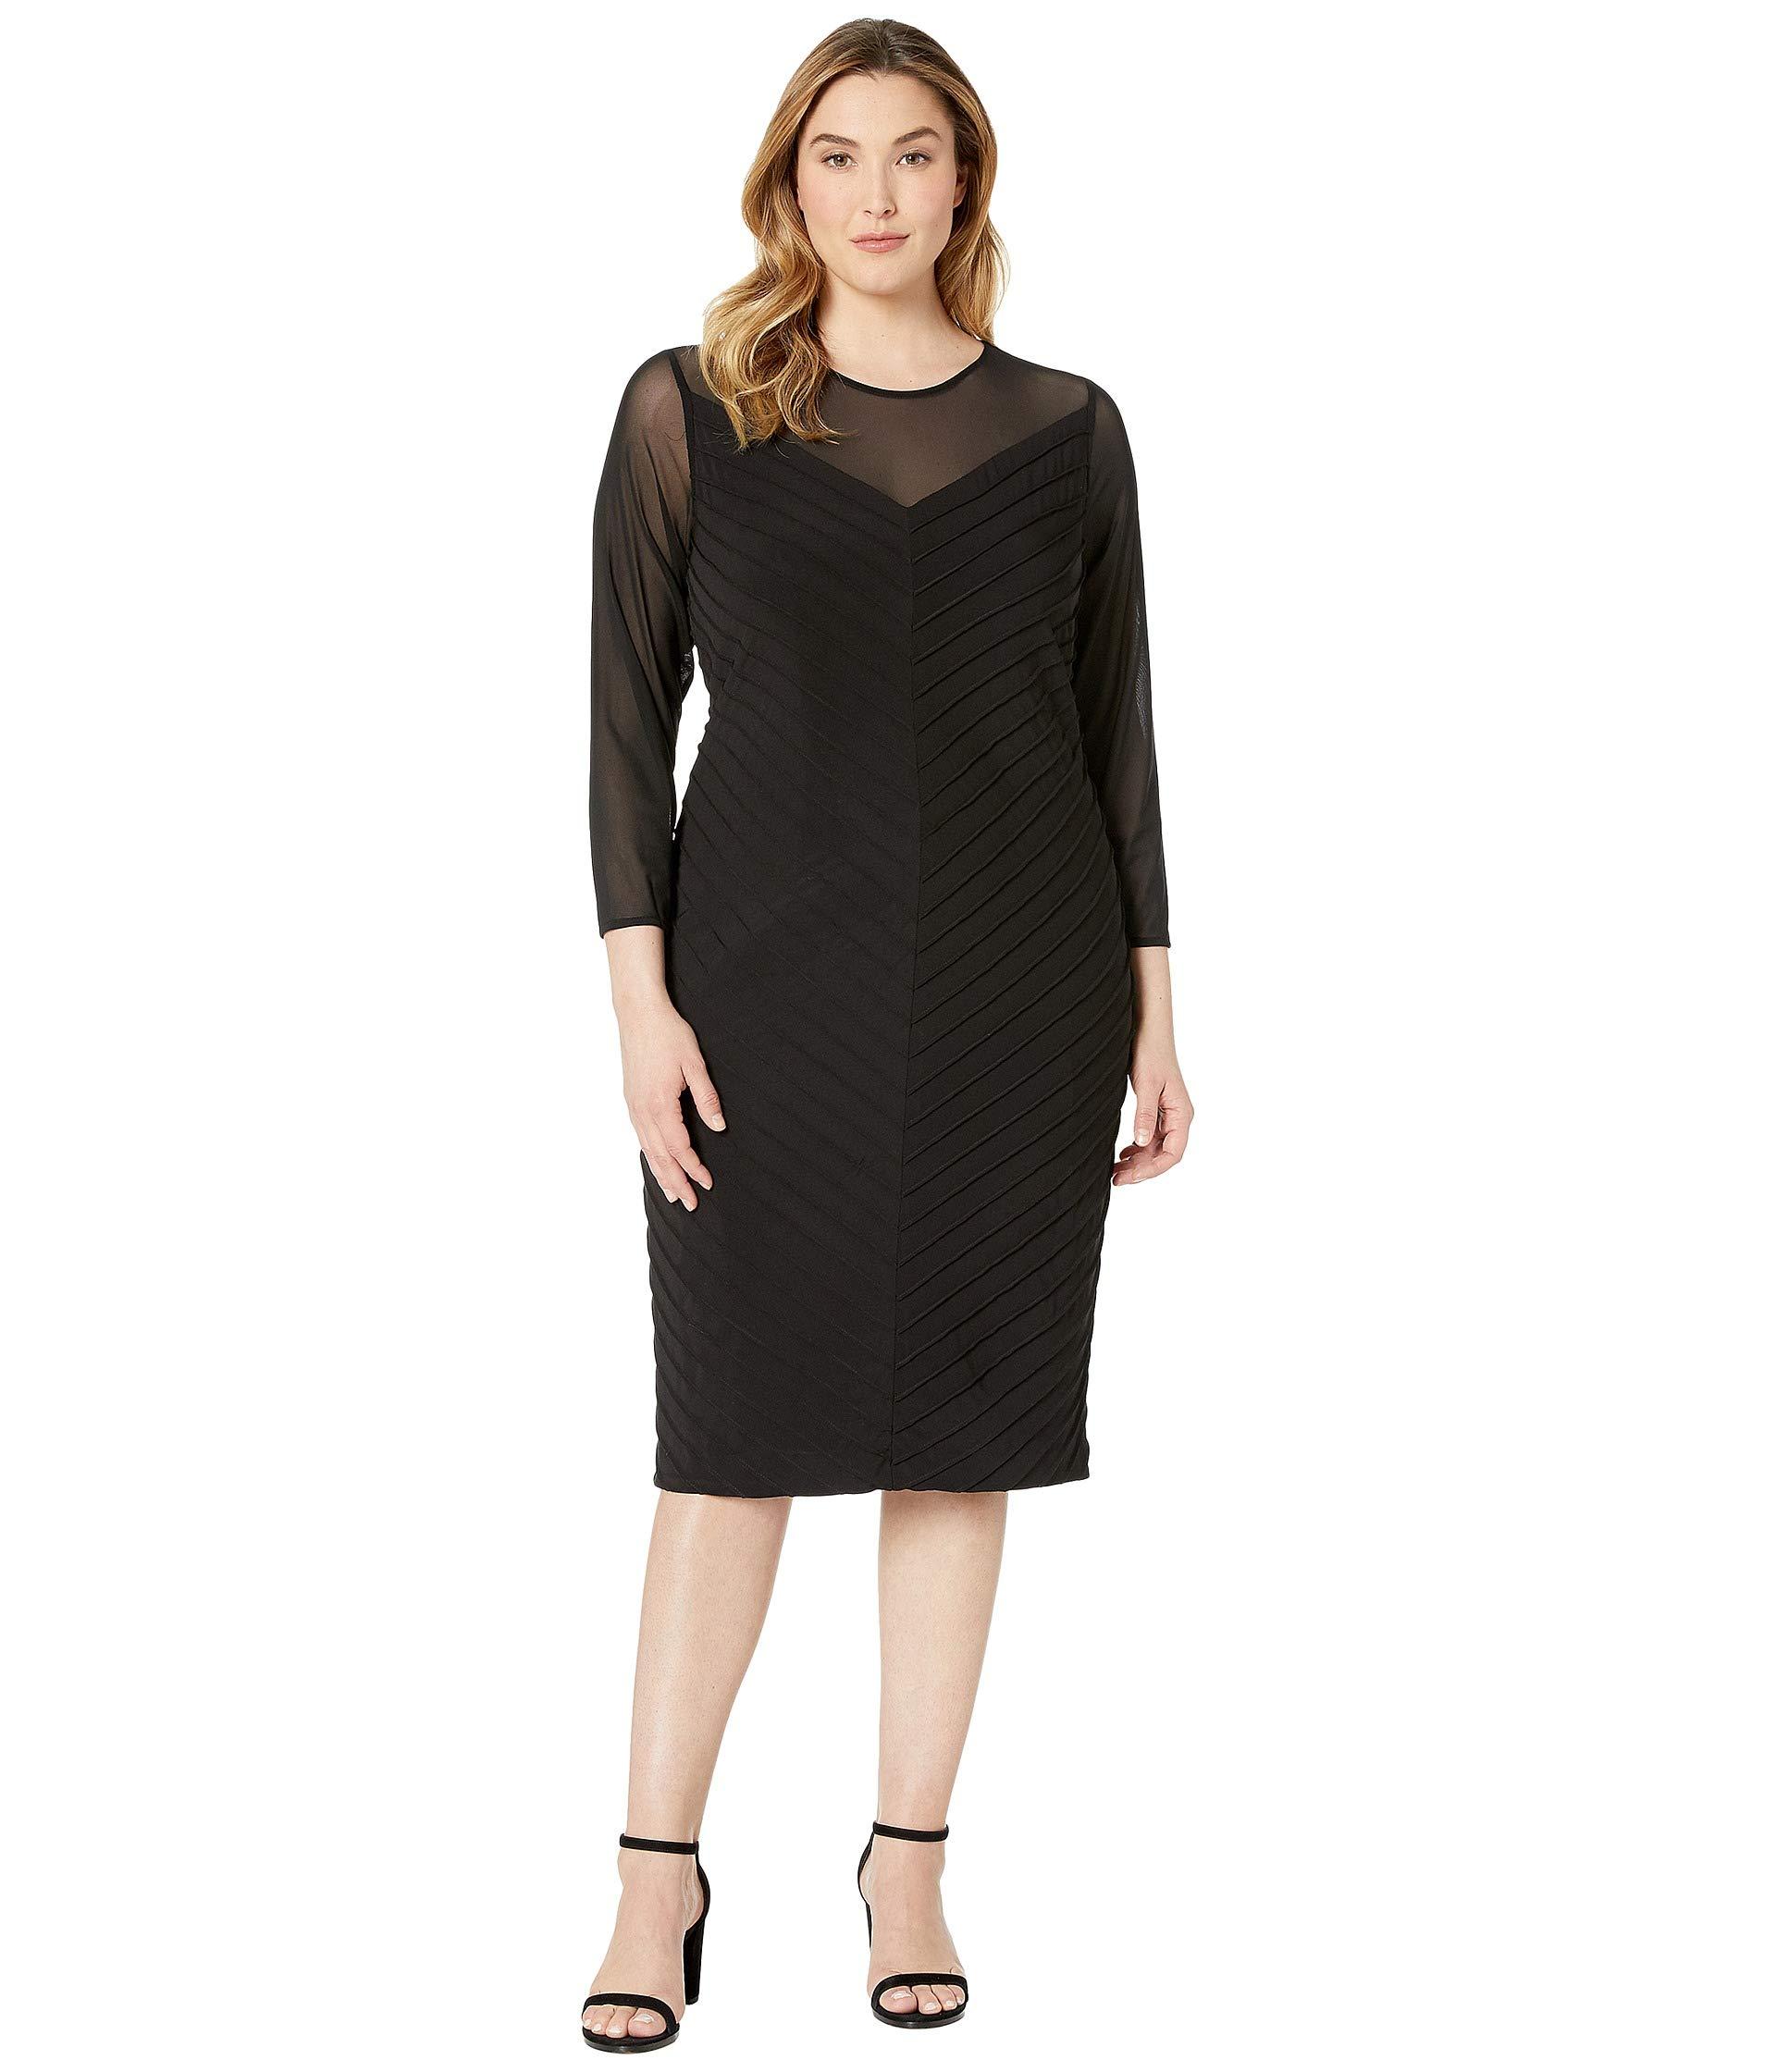 Adrianna Papell Plus Size Matte Jersey Sheath Dress With Illusion Mesh Vneckline in Black Lyst